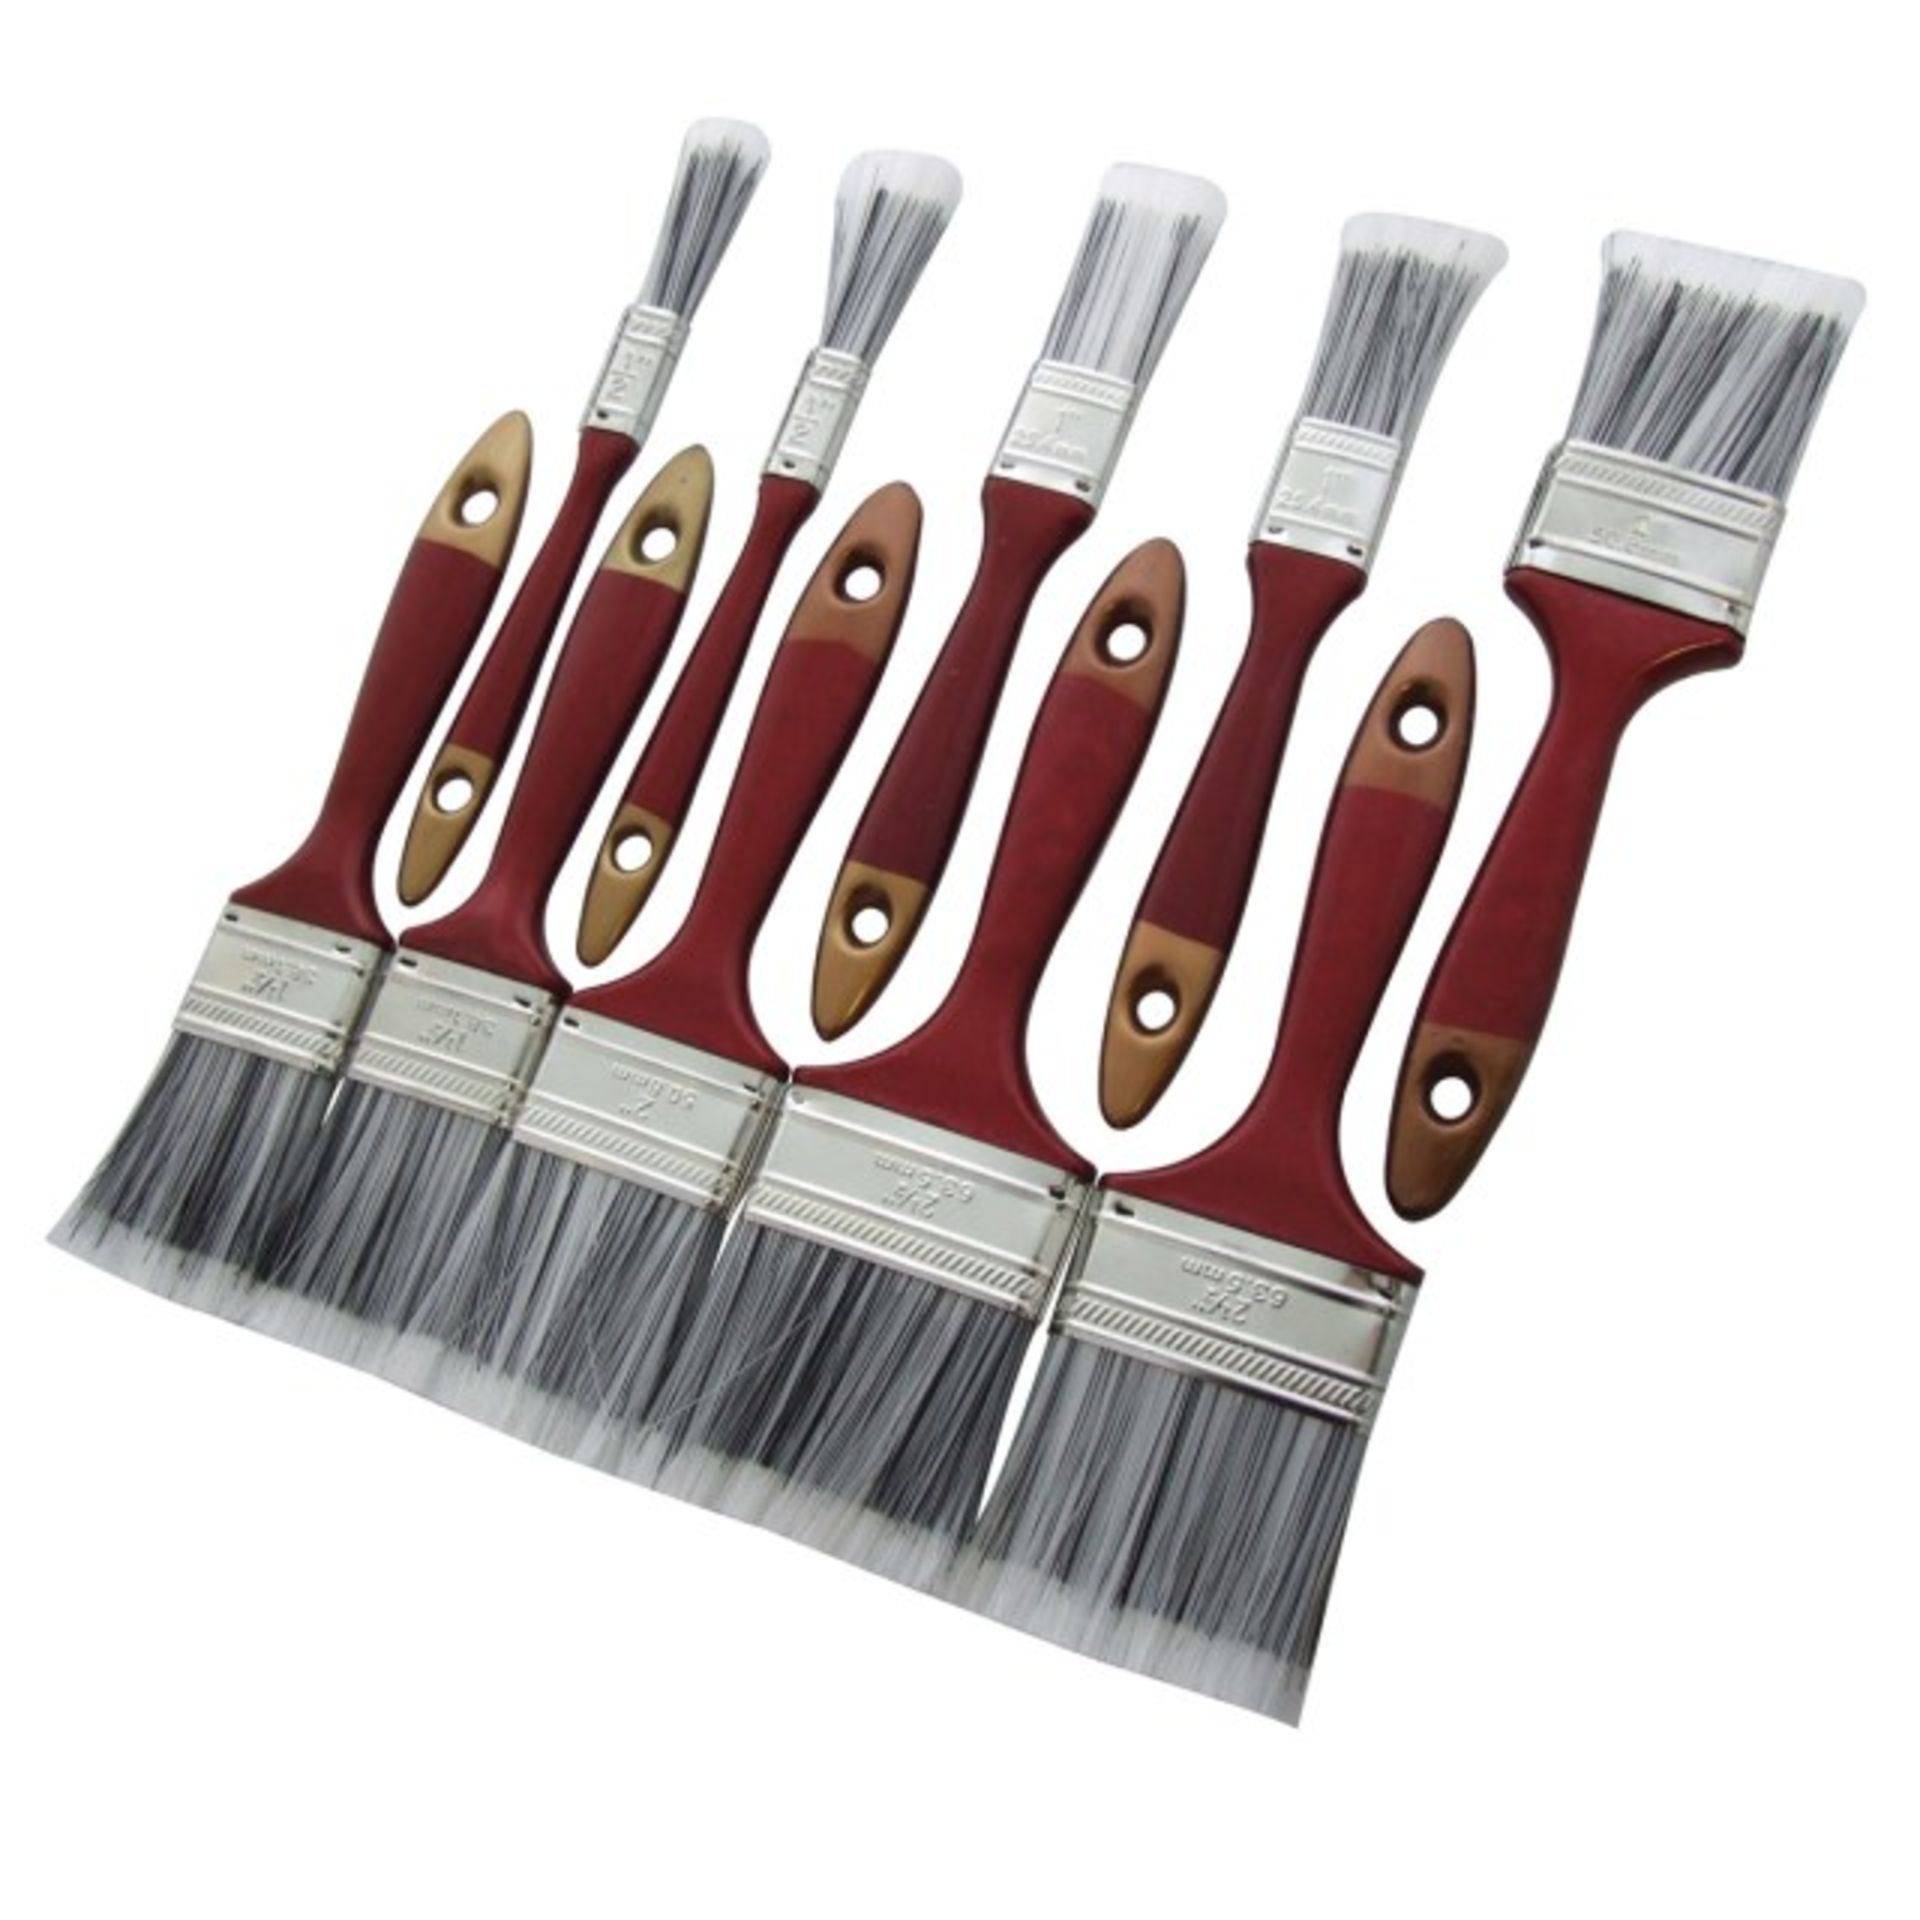 V *TRADE QTY* Brand New 10 Piece Paint Brush set X 36 Bid price to be multiplied by Thirty-six